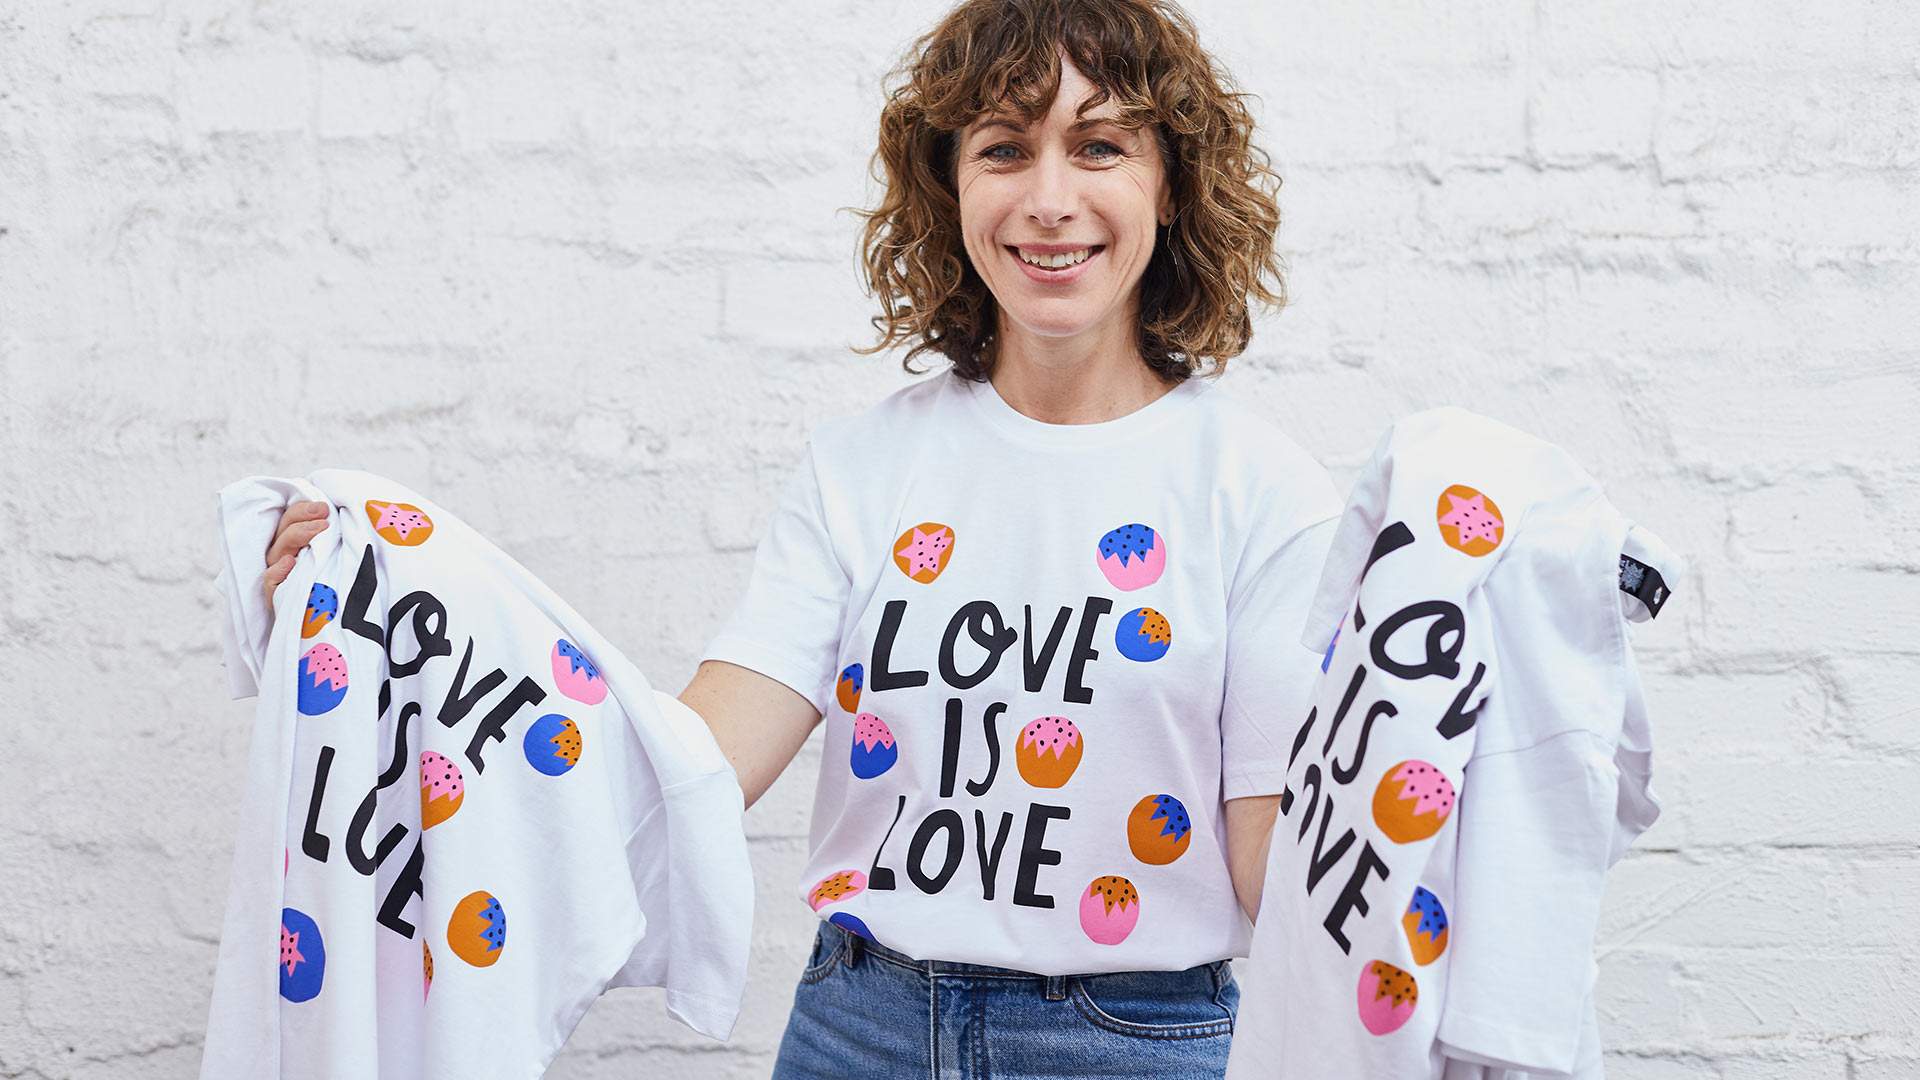 Gorman Is Incentivising People to Enrol to Vote with Free T-Shirts